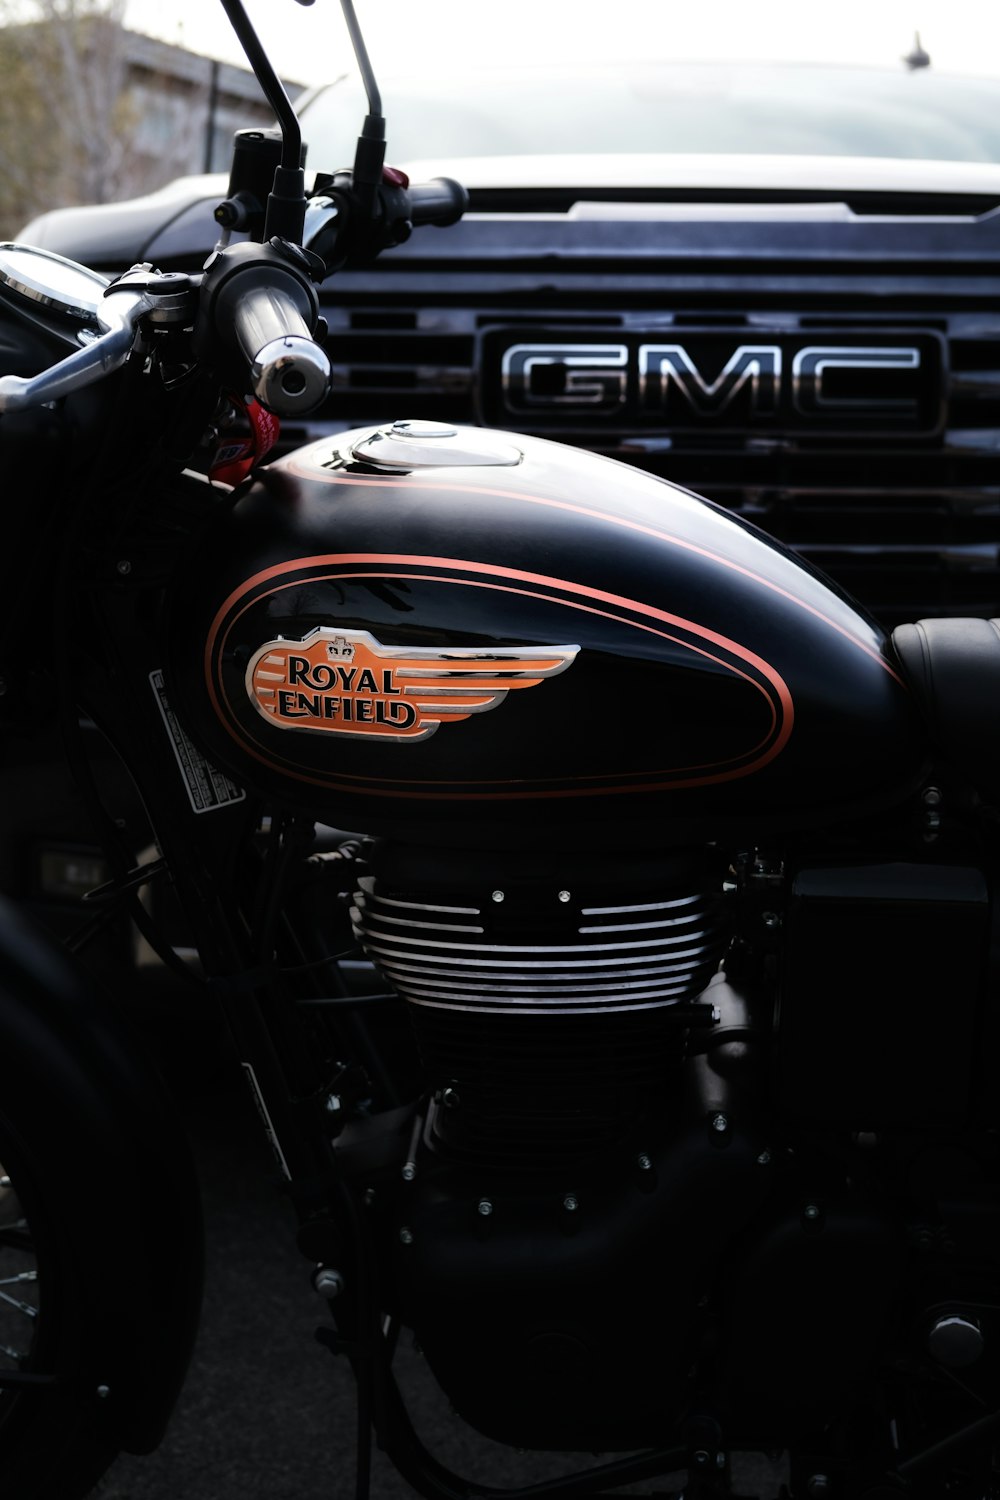 a close up of a motorcycle parked in a parking lot